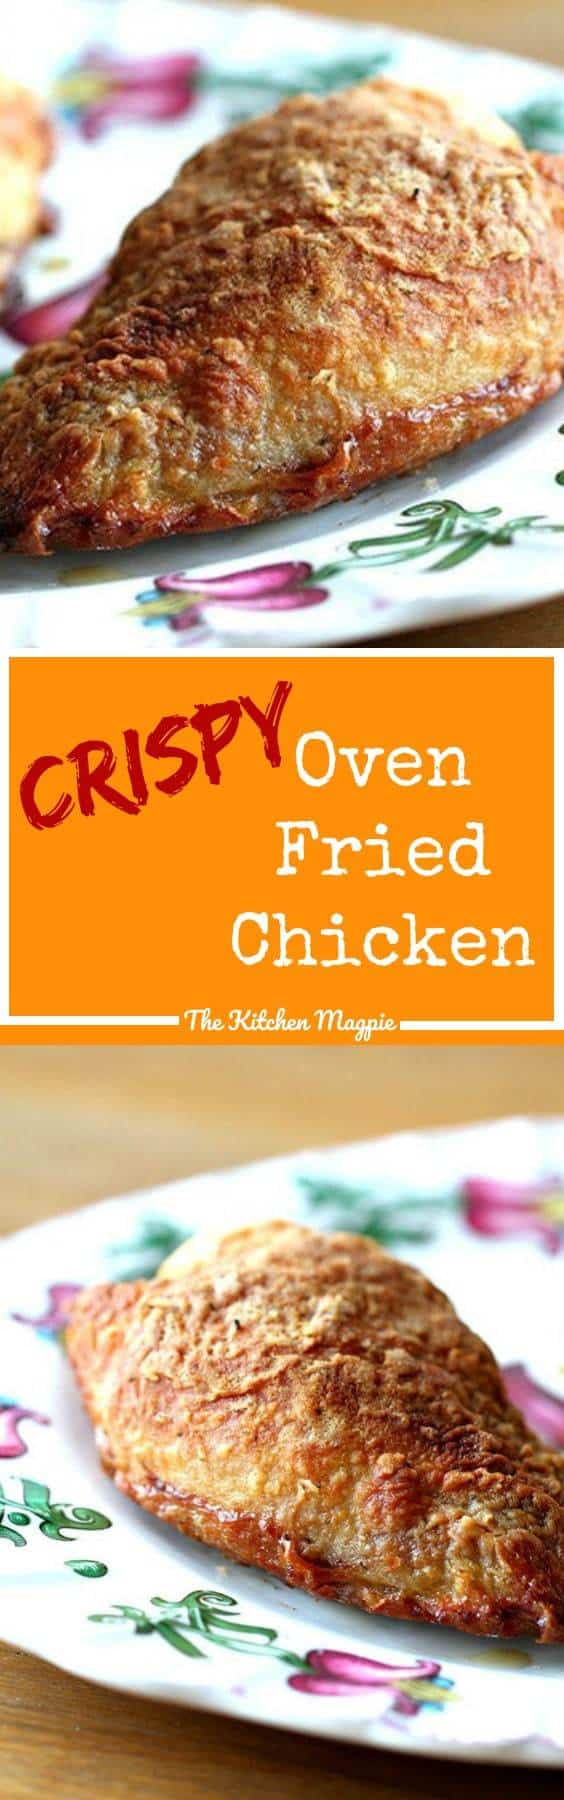 The Kitchen Magpie’s Crispy Oven Fried Chicken - find out the secret to the most amazing oven fried chicken you will ever eat! Just look at that crispy skin! No crazy batter, either! 